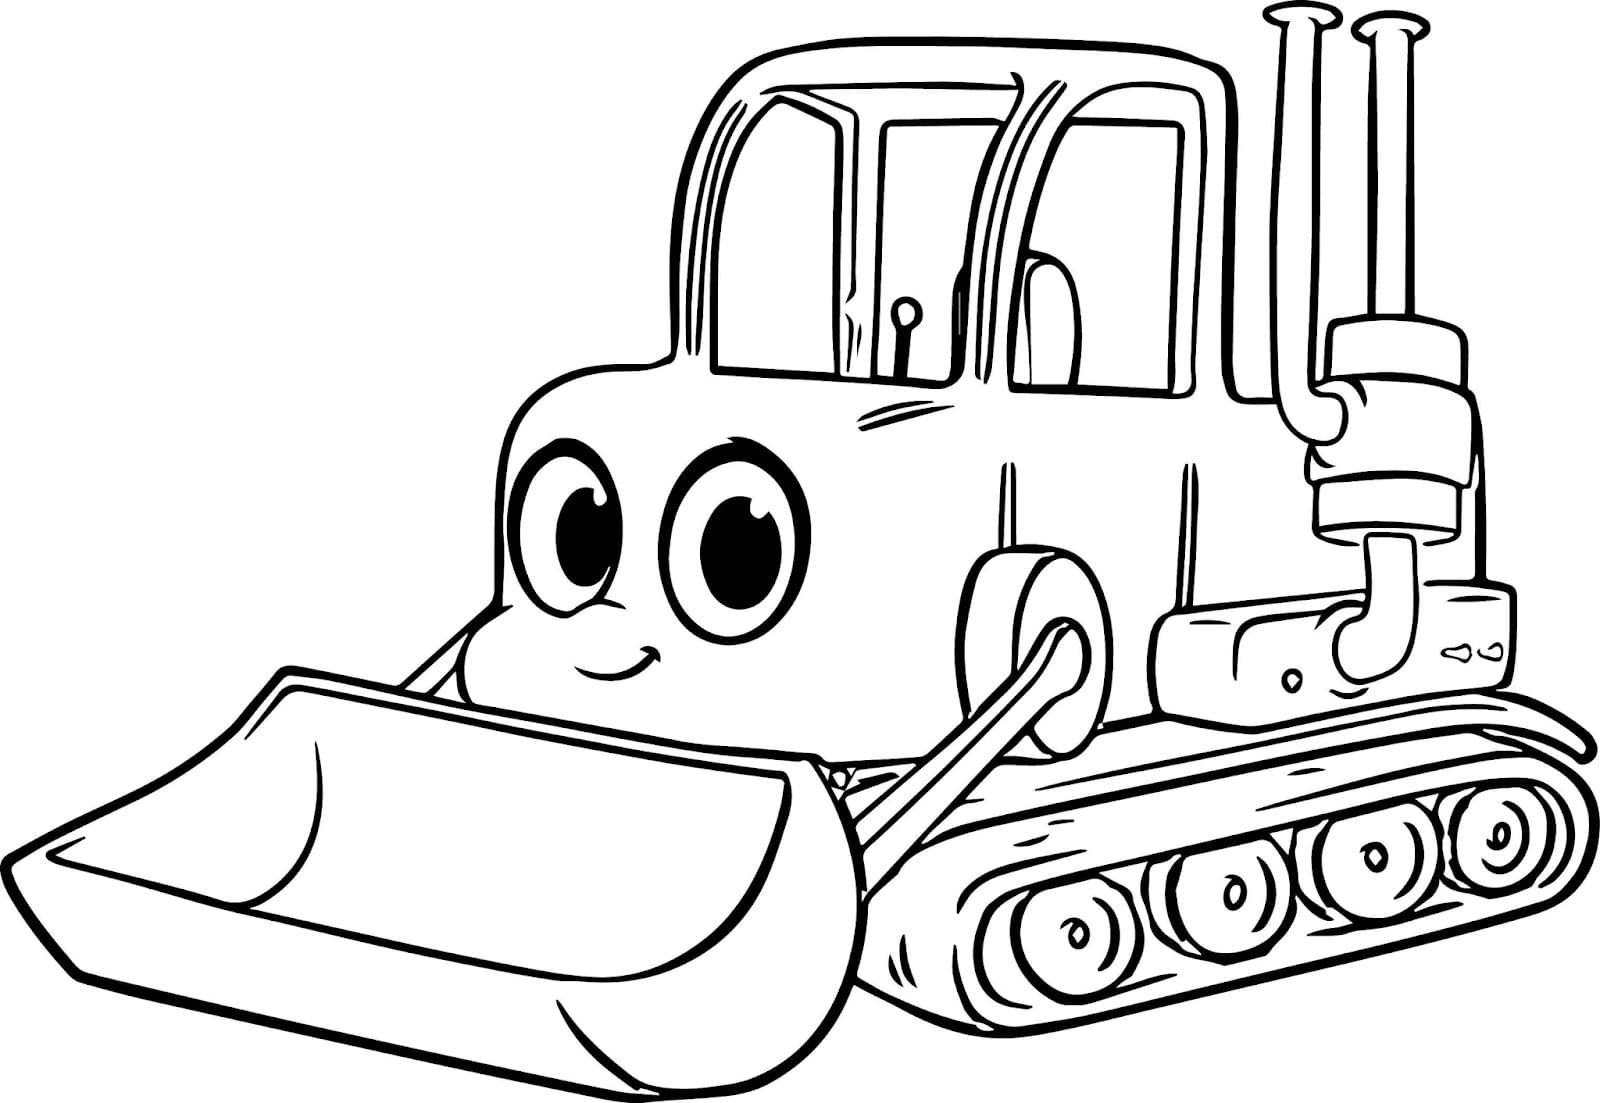 Coloring page Tractor Tractor on tracks